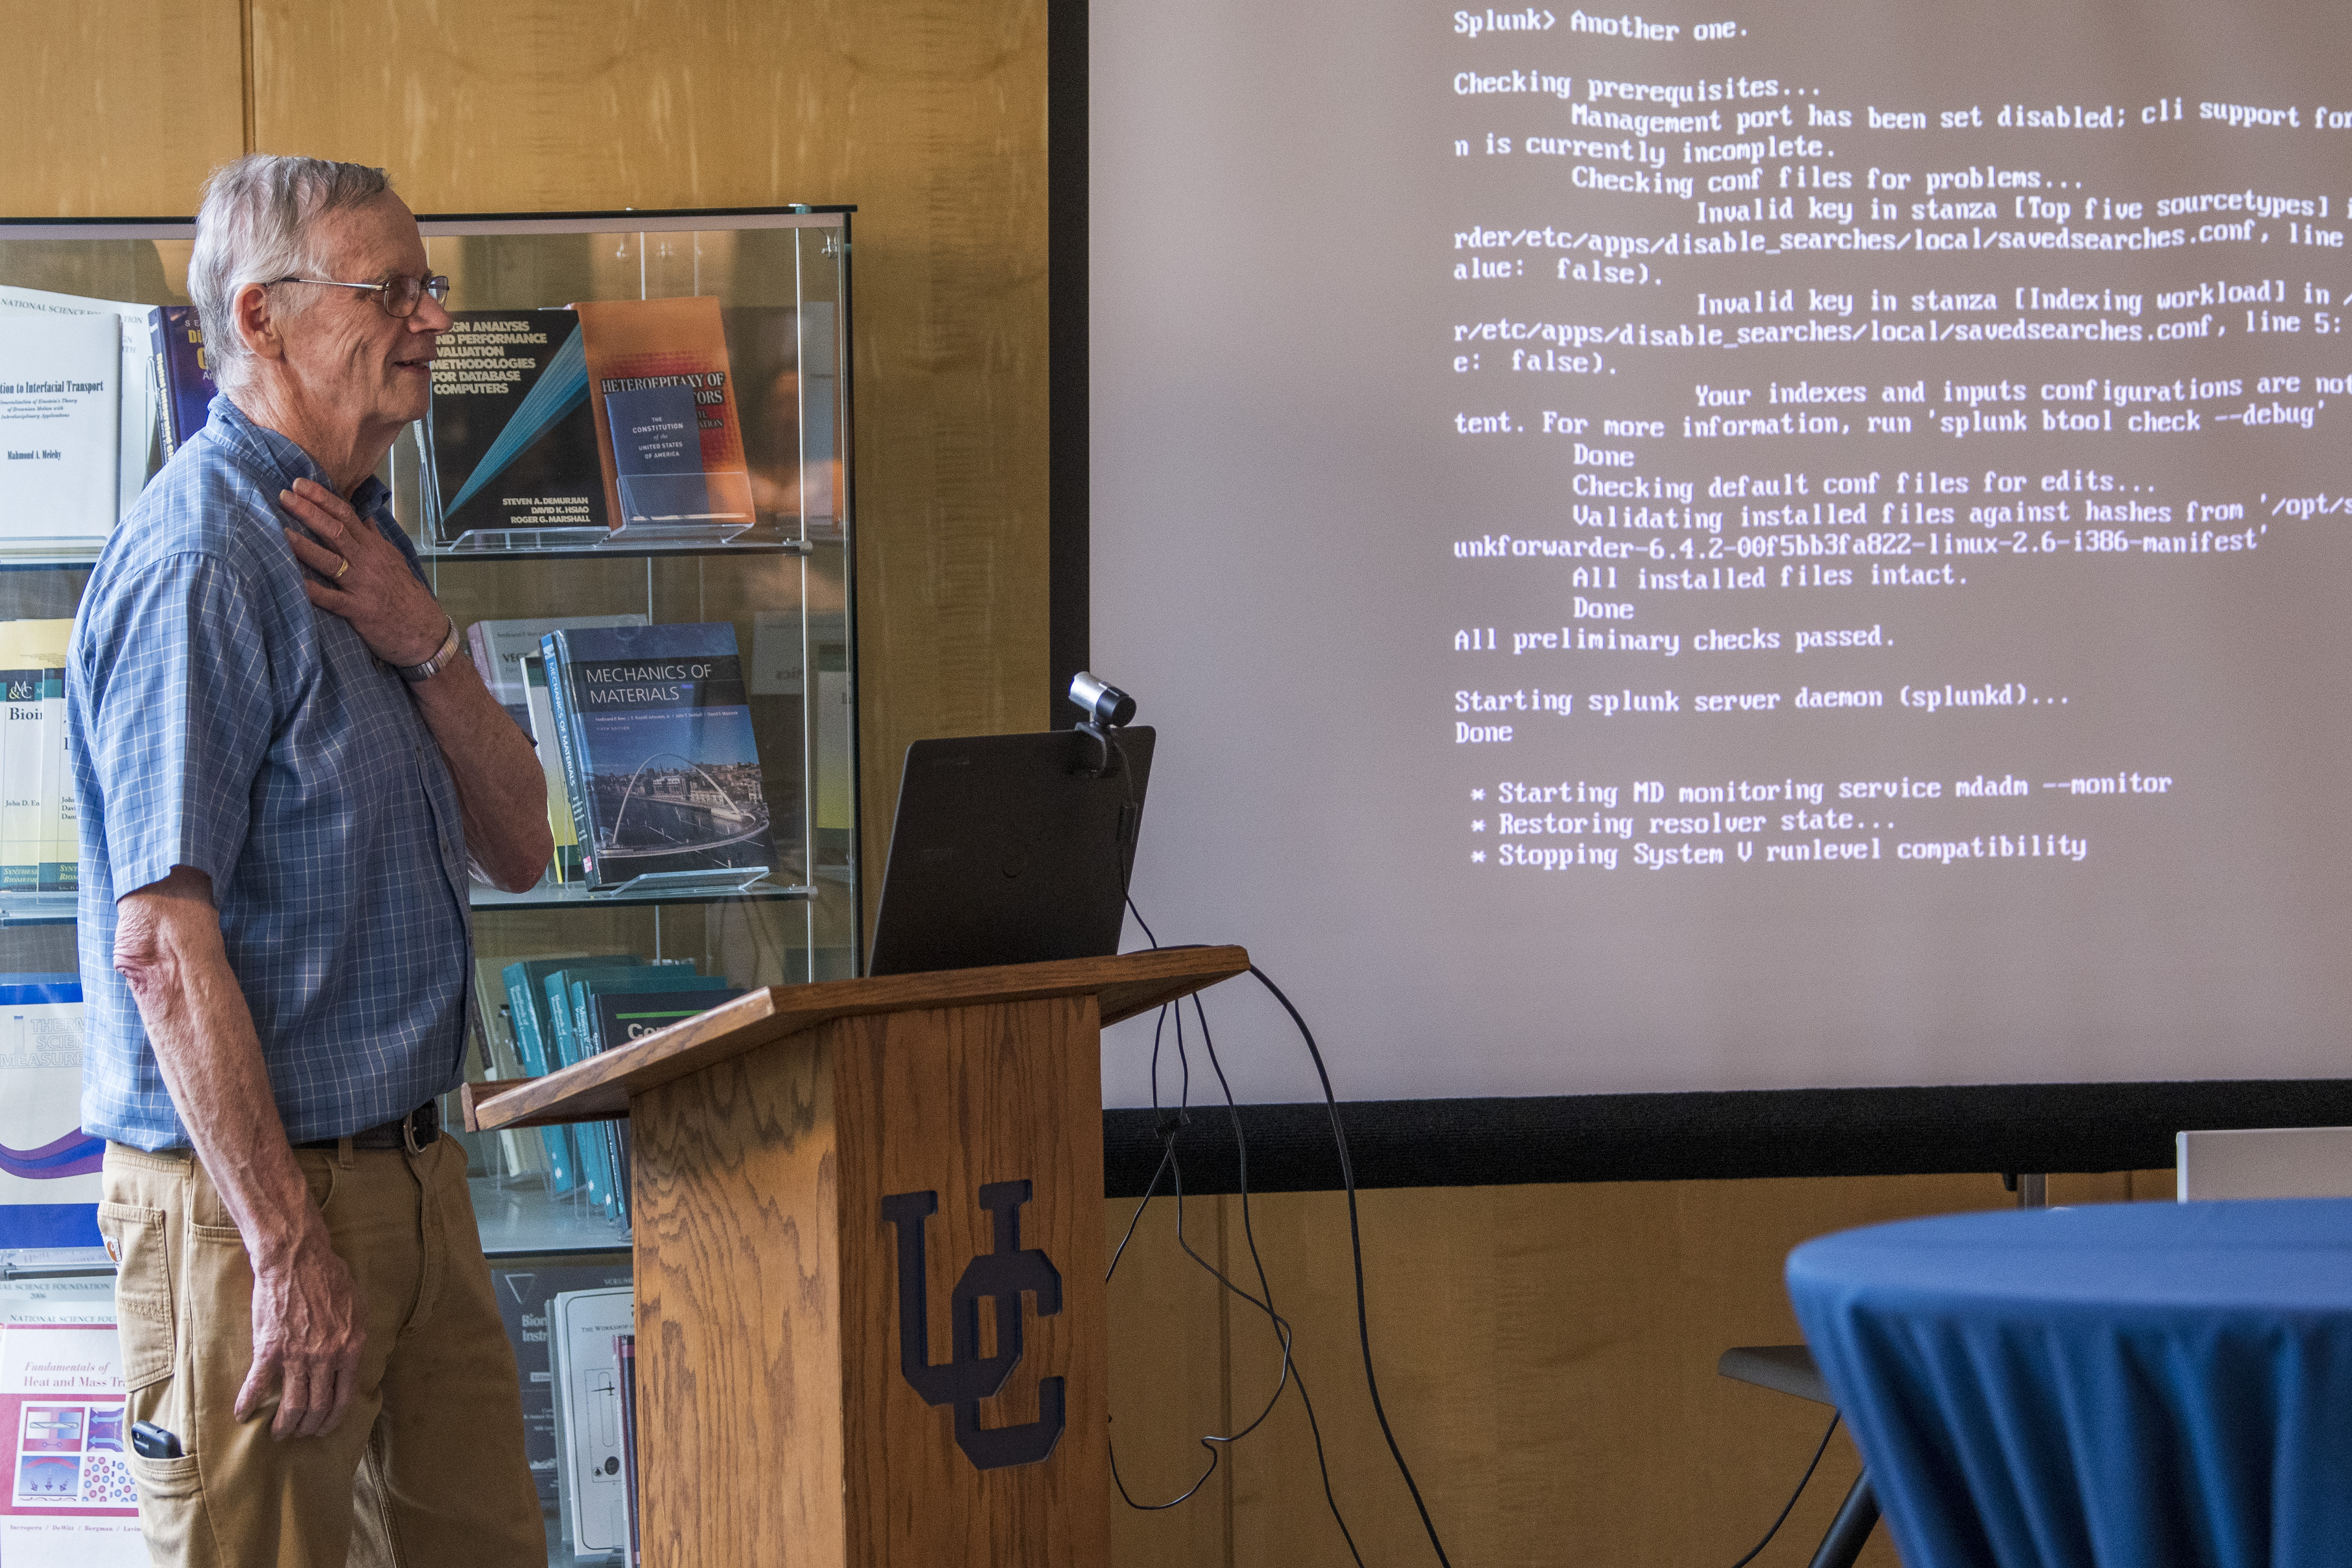 John Marshall, one of the pioneers at UConn who established the internet on campus, shutting down the old server for good at the Information Technologies Engineering Building (ITE) on June 25, 2019. (Sean Flynn/UConn Photo)